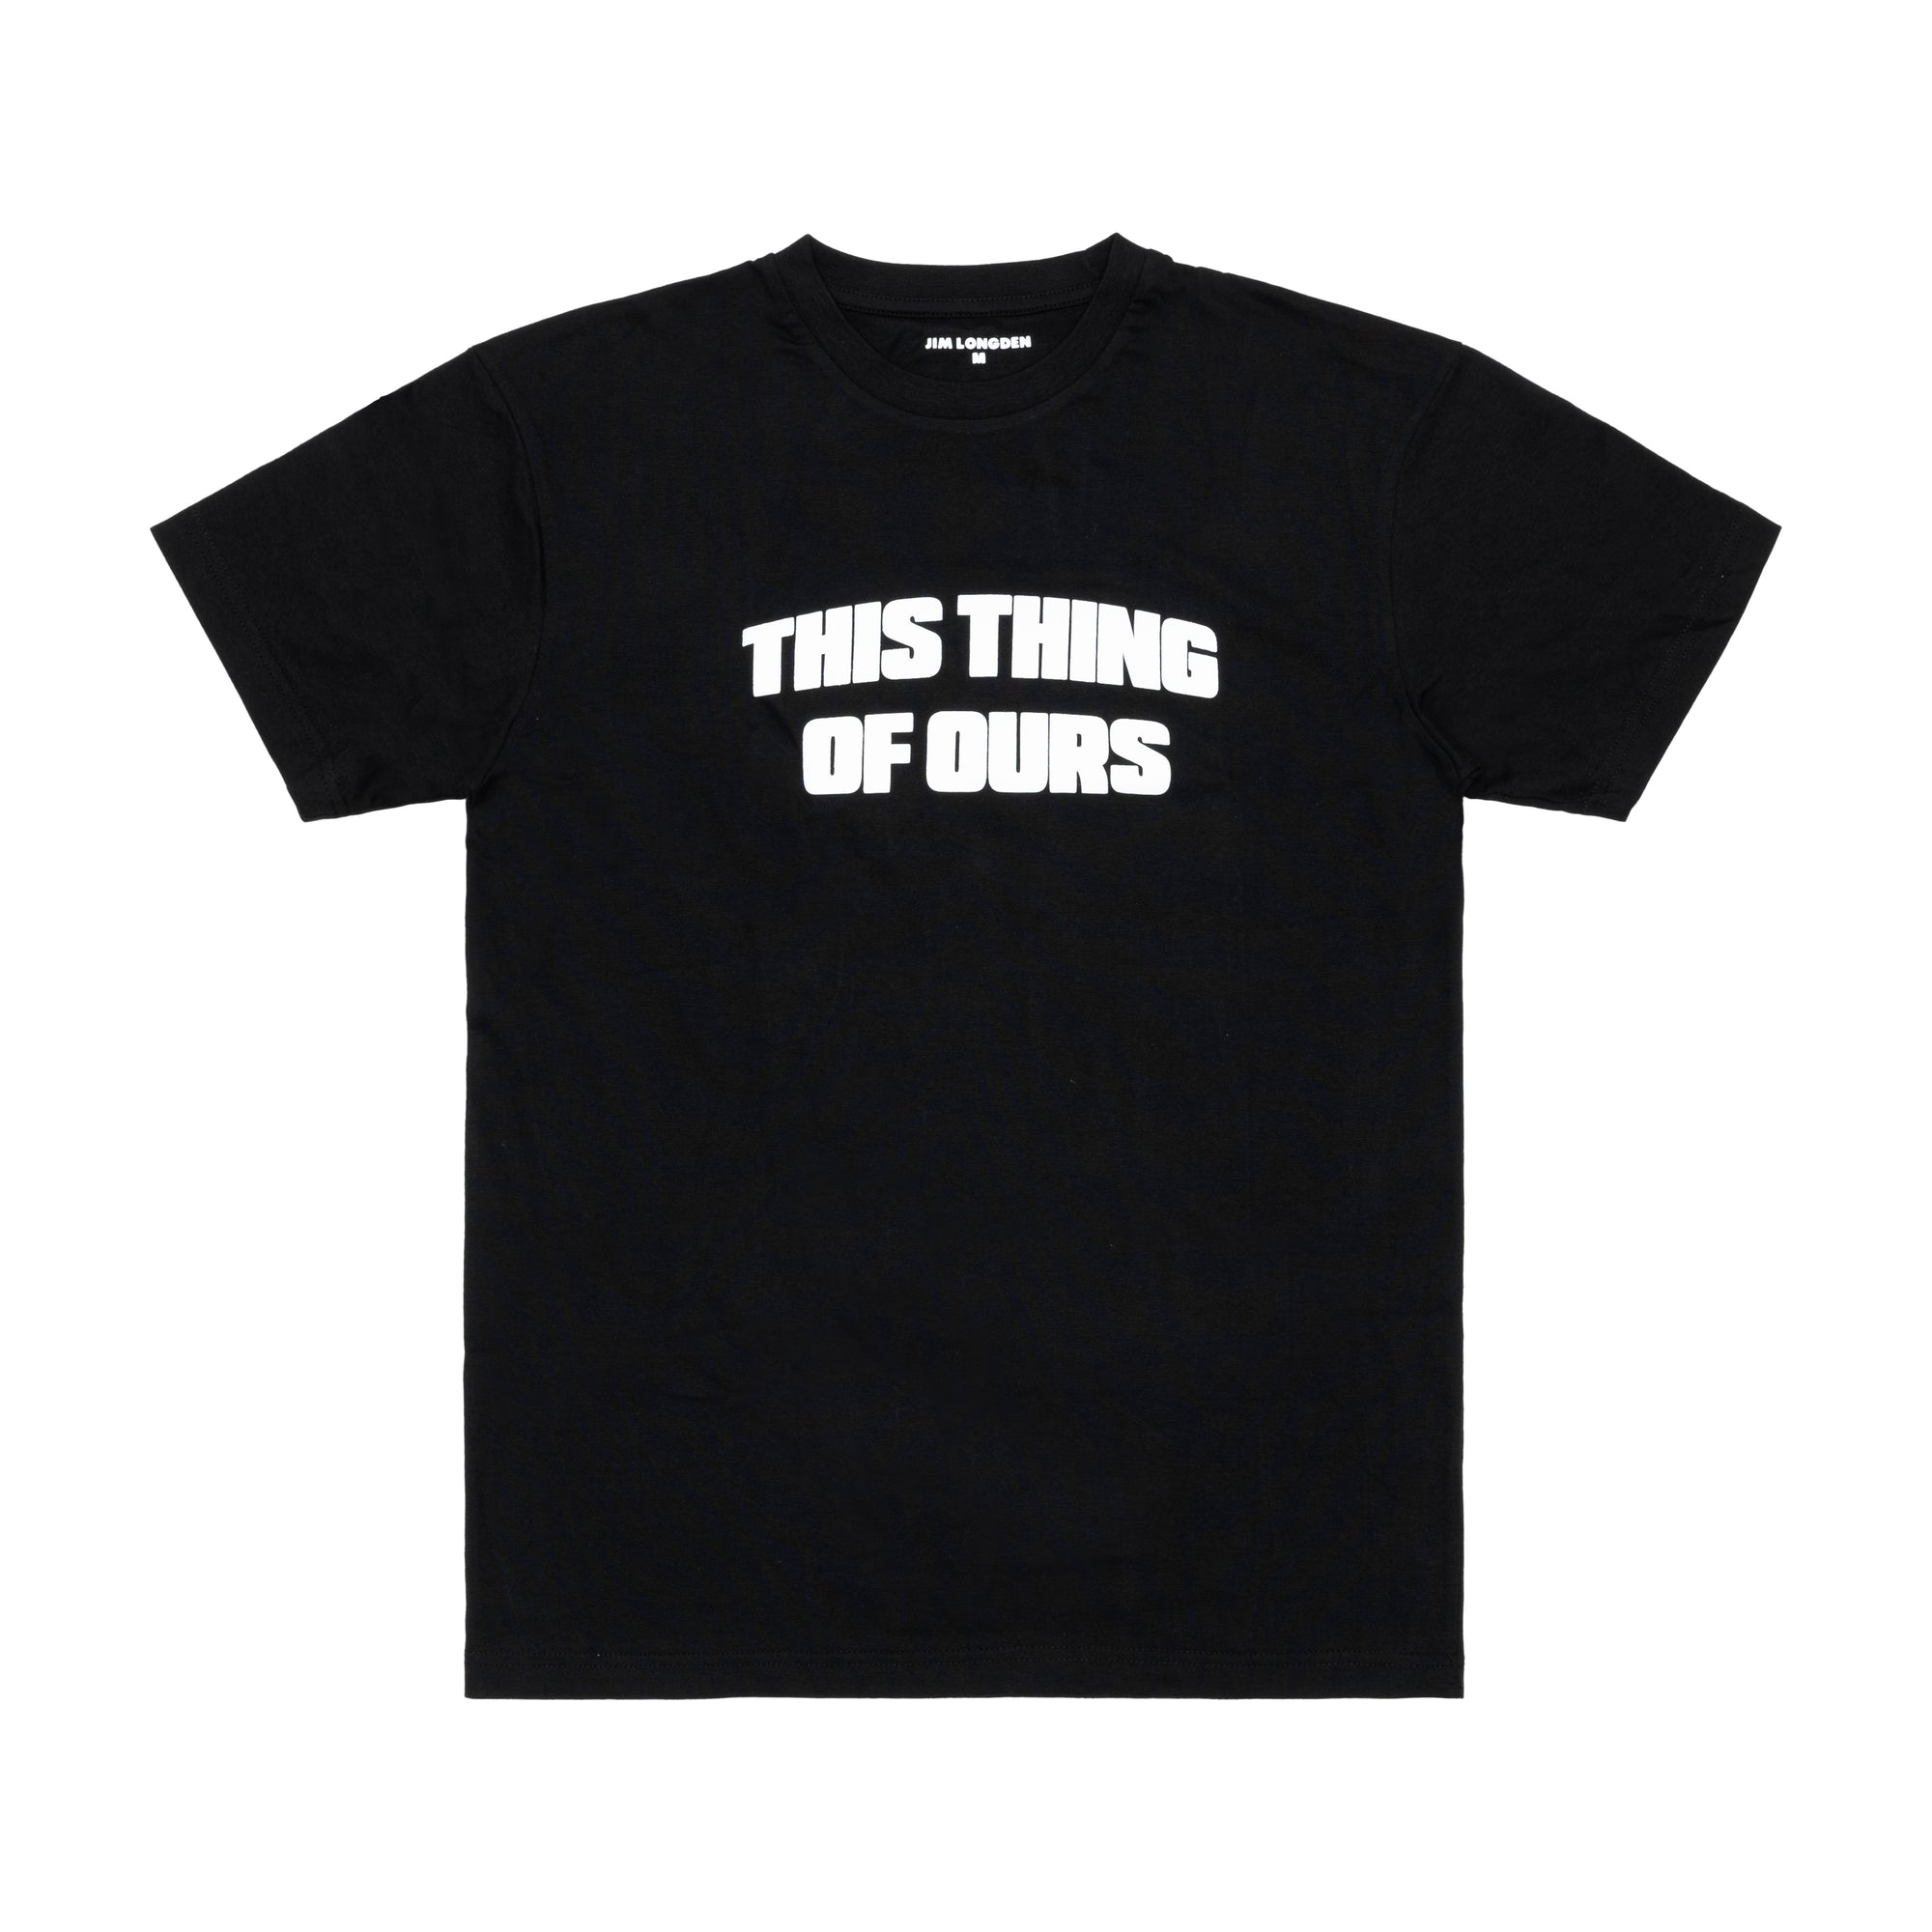 JIM LONGDEN - This Thing Of Ours Tshirt - (Black) view 1